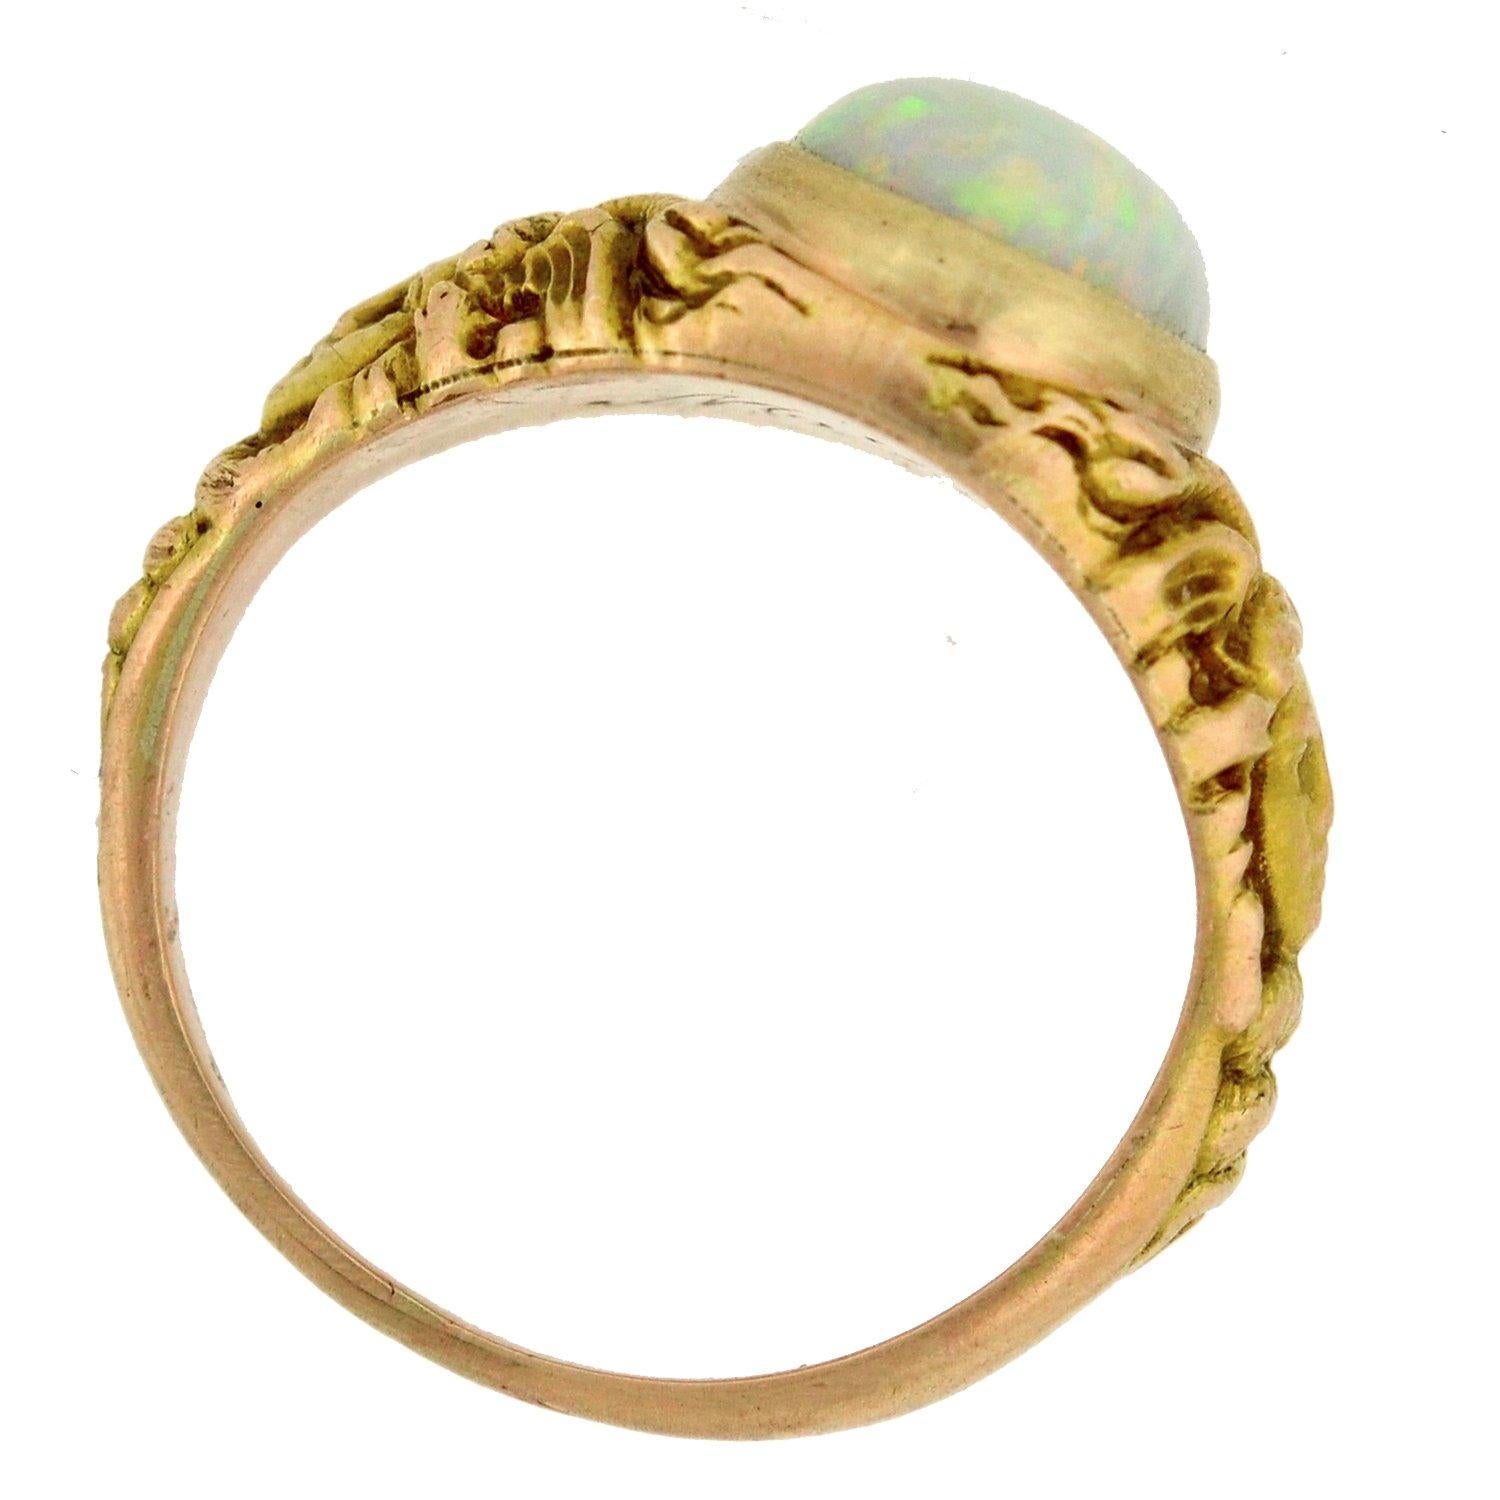 A stunning opal ring from the Art Nouveau (ca1900) era! This piece is crafted in 14kt yellow gold, and adorns a stunning opal cabochon at the center of a gorgeous repousse design. The bezel-set stone exhibits a mesmerizing array of shimmery